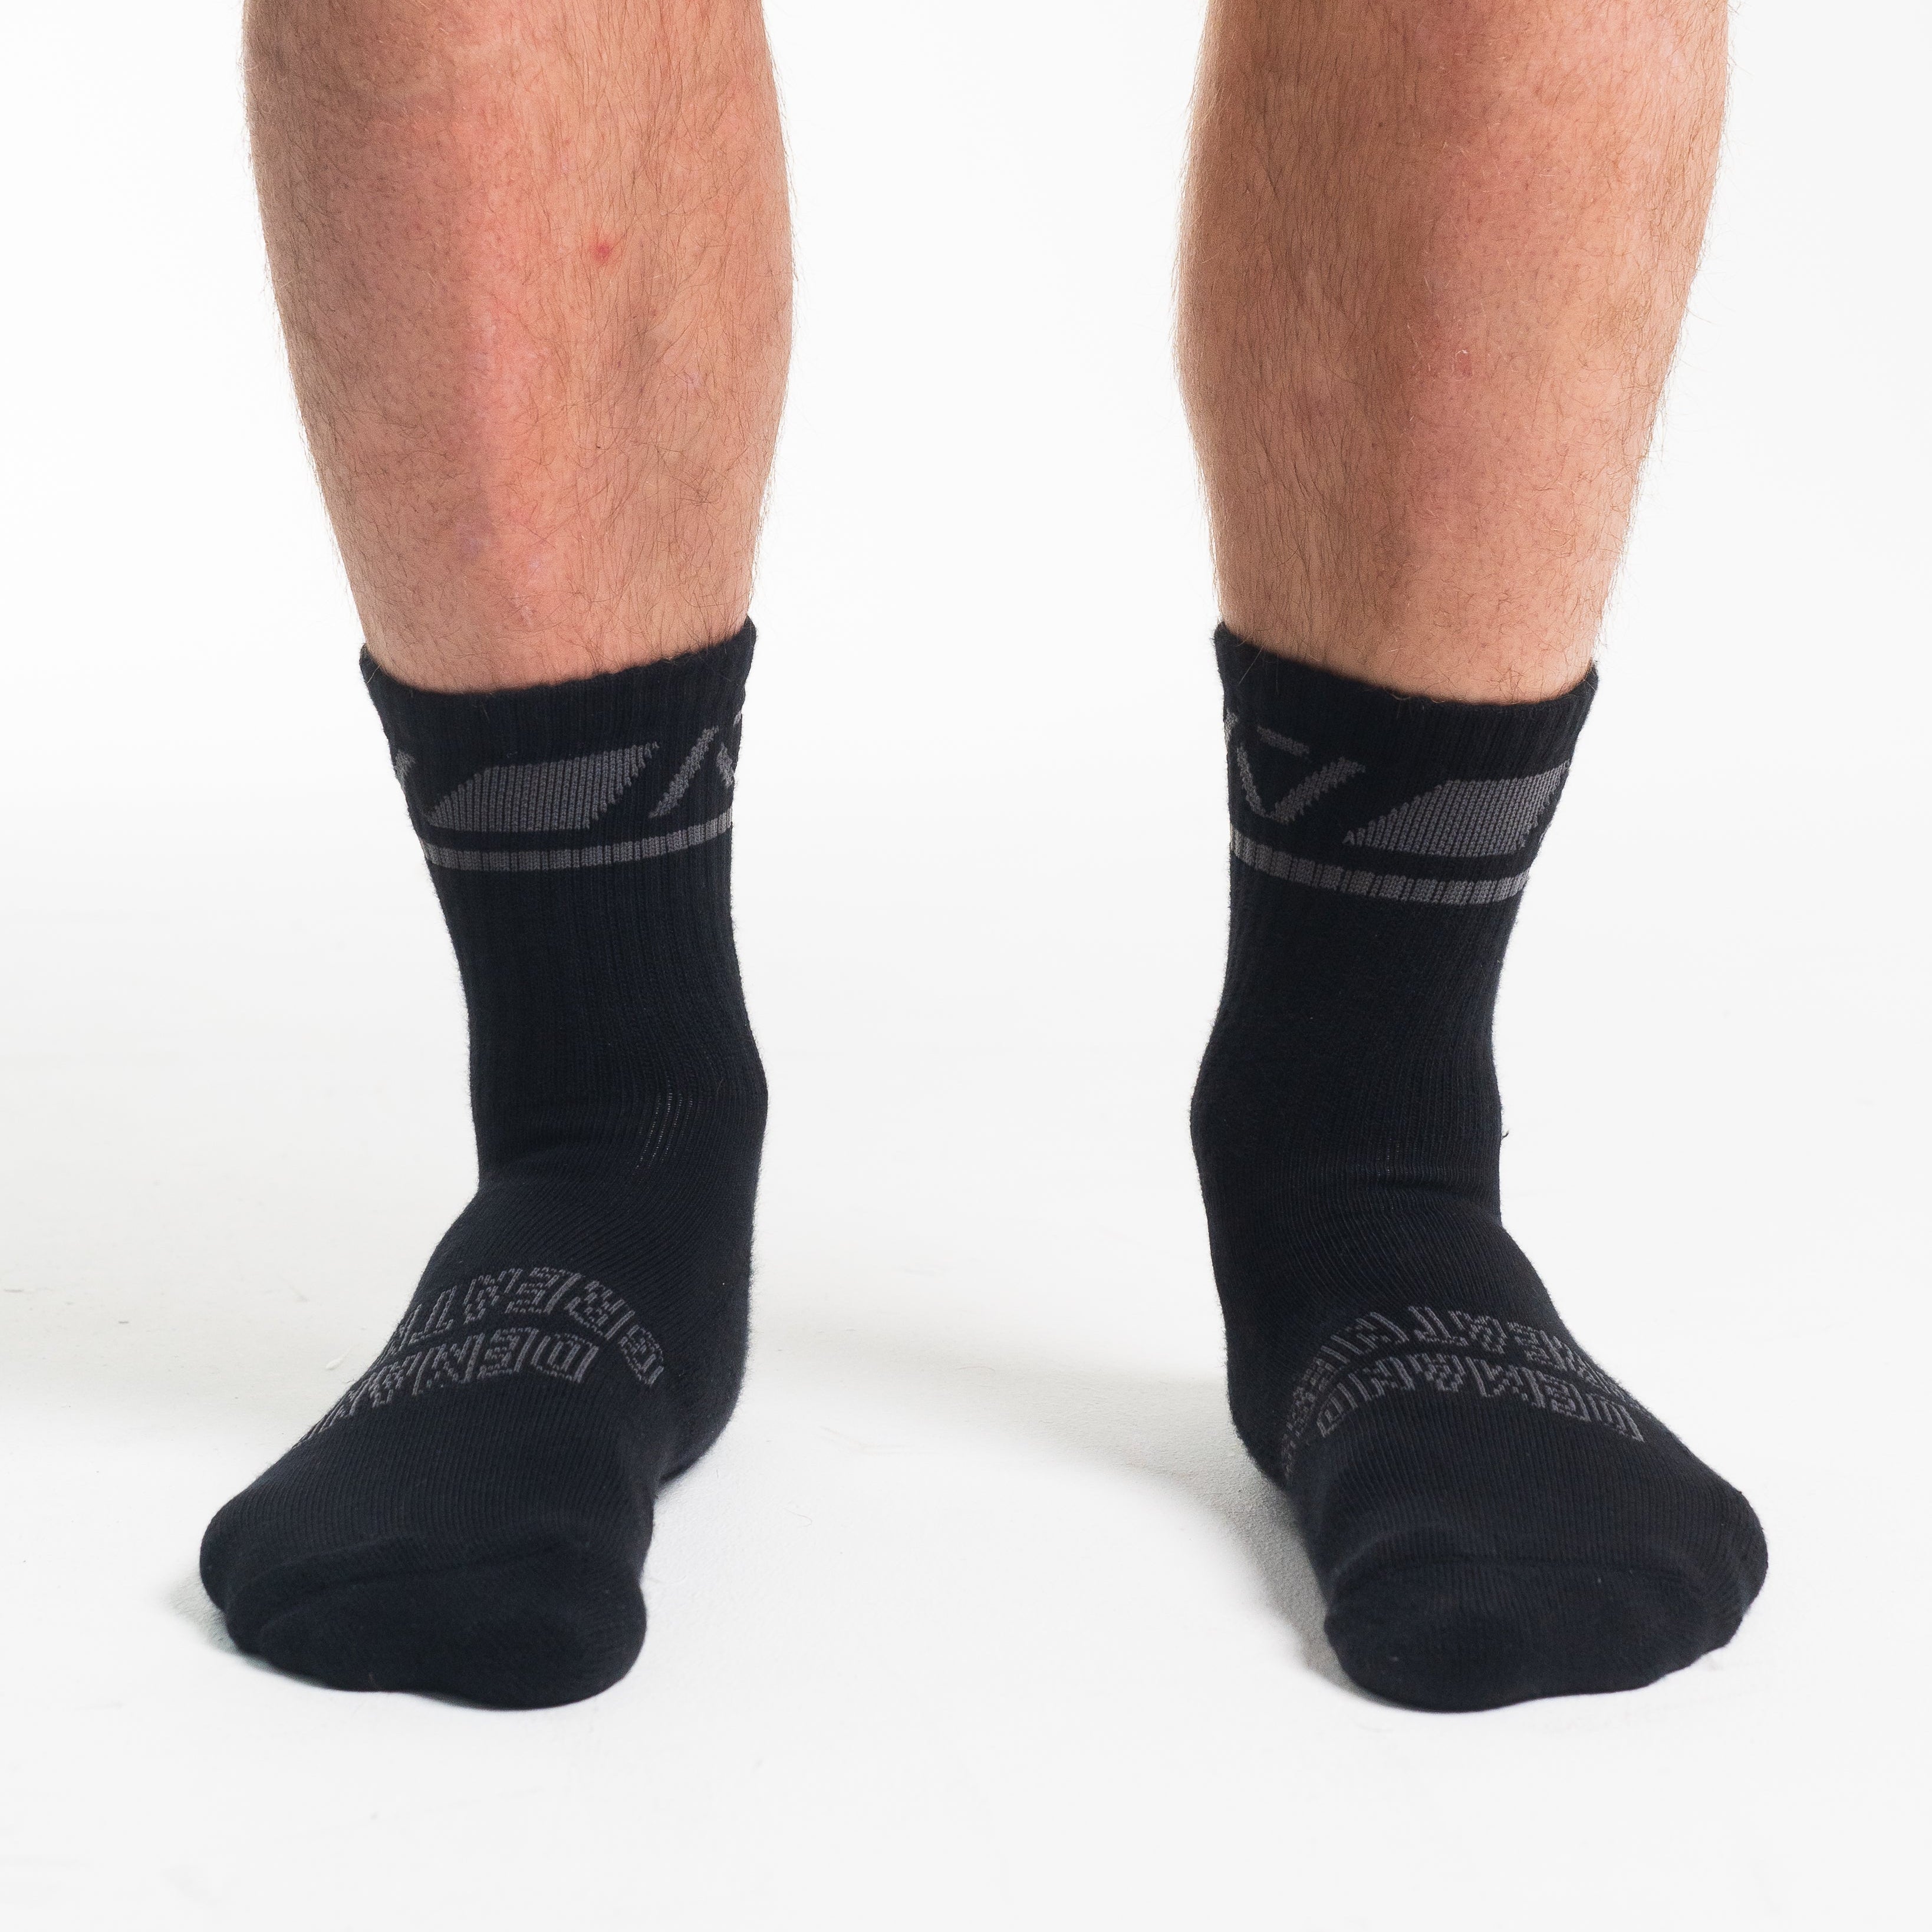 A7 Shadow Stone Crew socks showcase dark grey logos to keep contrast at a minimum and let your energy show on the platform, in your training or while out and about. The IPF Approved Shadow Stone Meet Kit includes Powerlifting Singlet, A7 Meet Shirt, A7 Zebra Wrist Wraps, A7 Deadlift Socks, Hourglass Knee Sleeves (Stiff Knee Sleeves and Rigor Mortis Knee Sleeves). Genouillères powerlifting shipping to France, Spain, Ireland, Germany, Italy, Sweden and EU. 